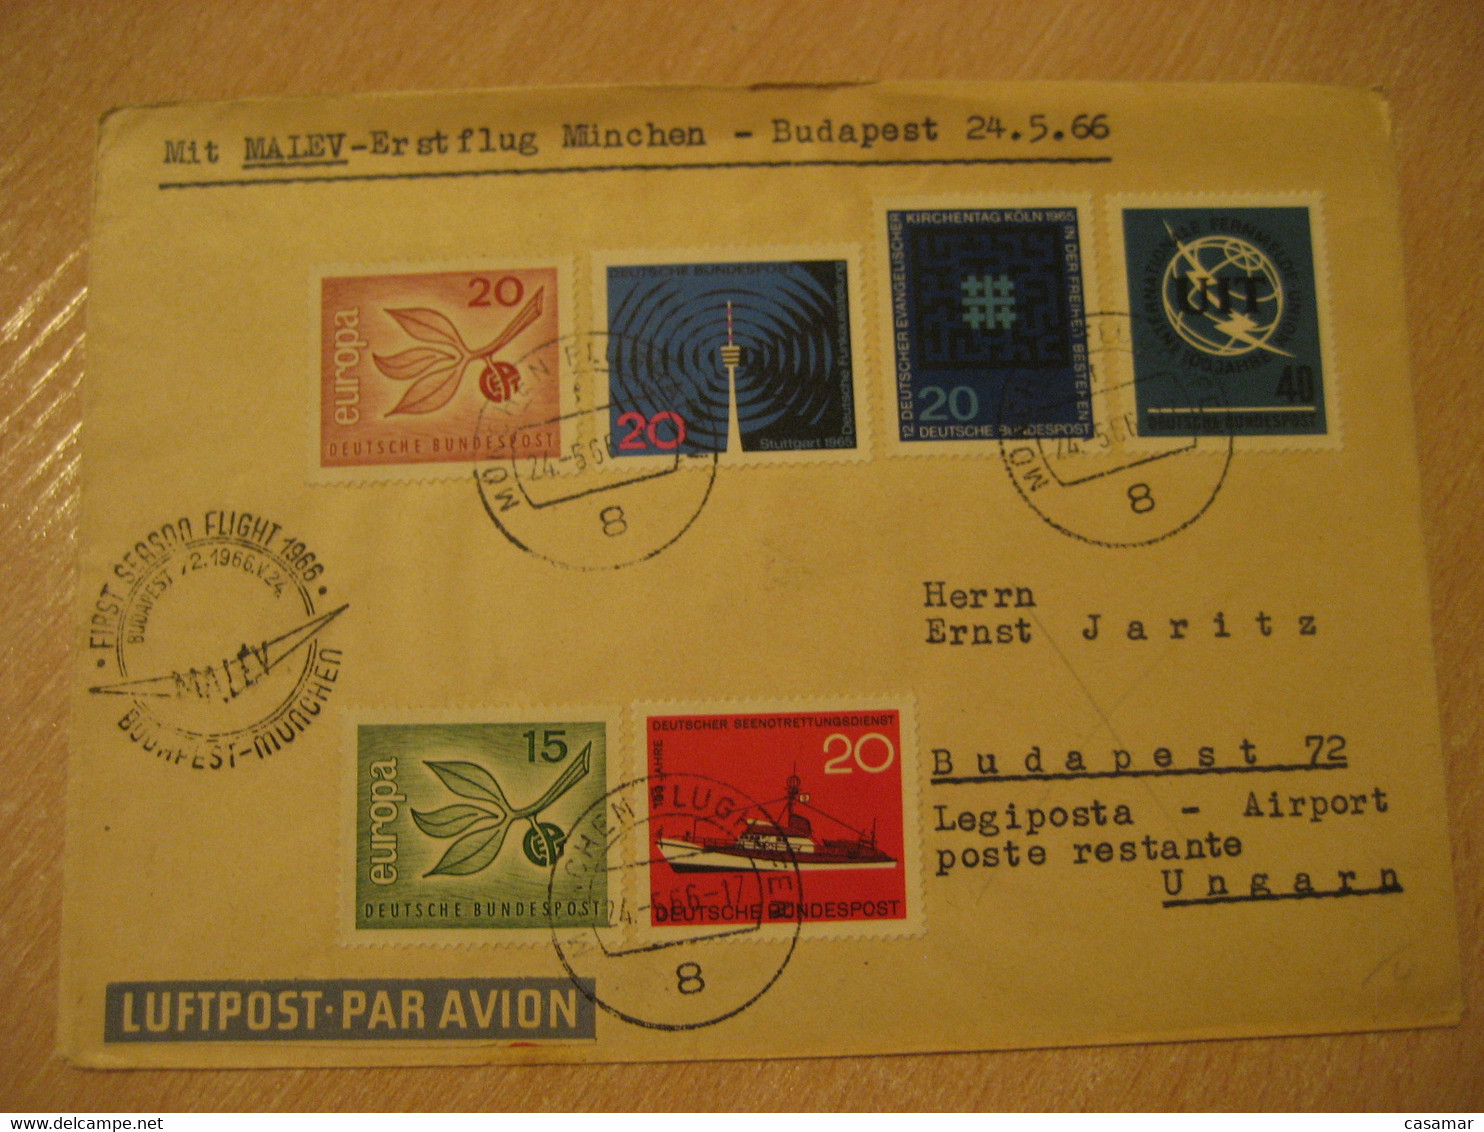 BUDAPEST Munich 1966 MALEV Airlines Airline First Season Flight Cancel Cover HUNGARY GERMANY - Covers & Documents